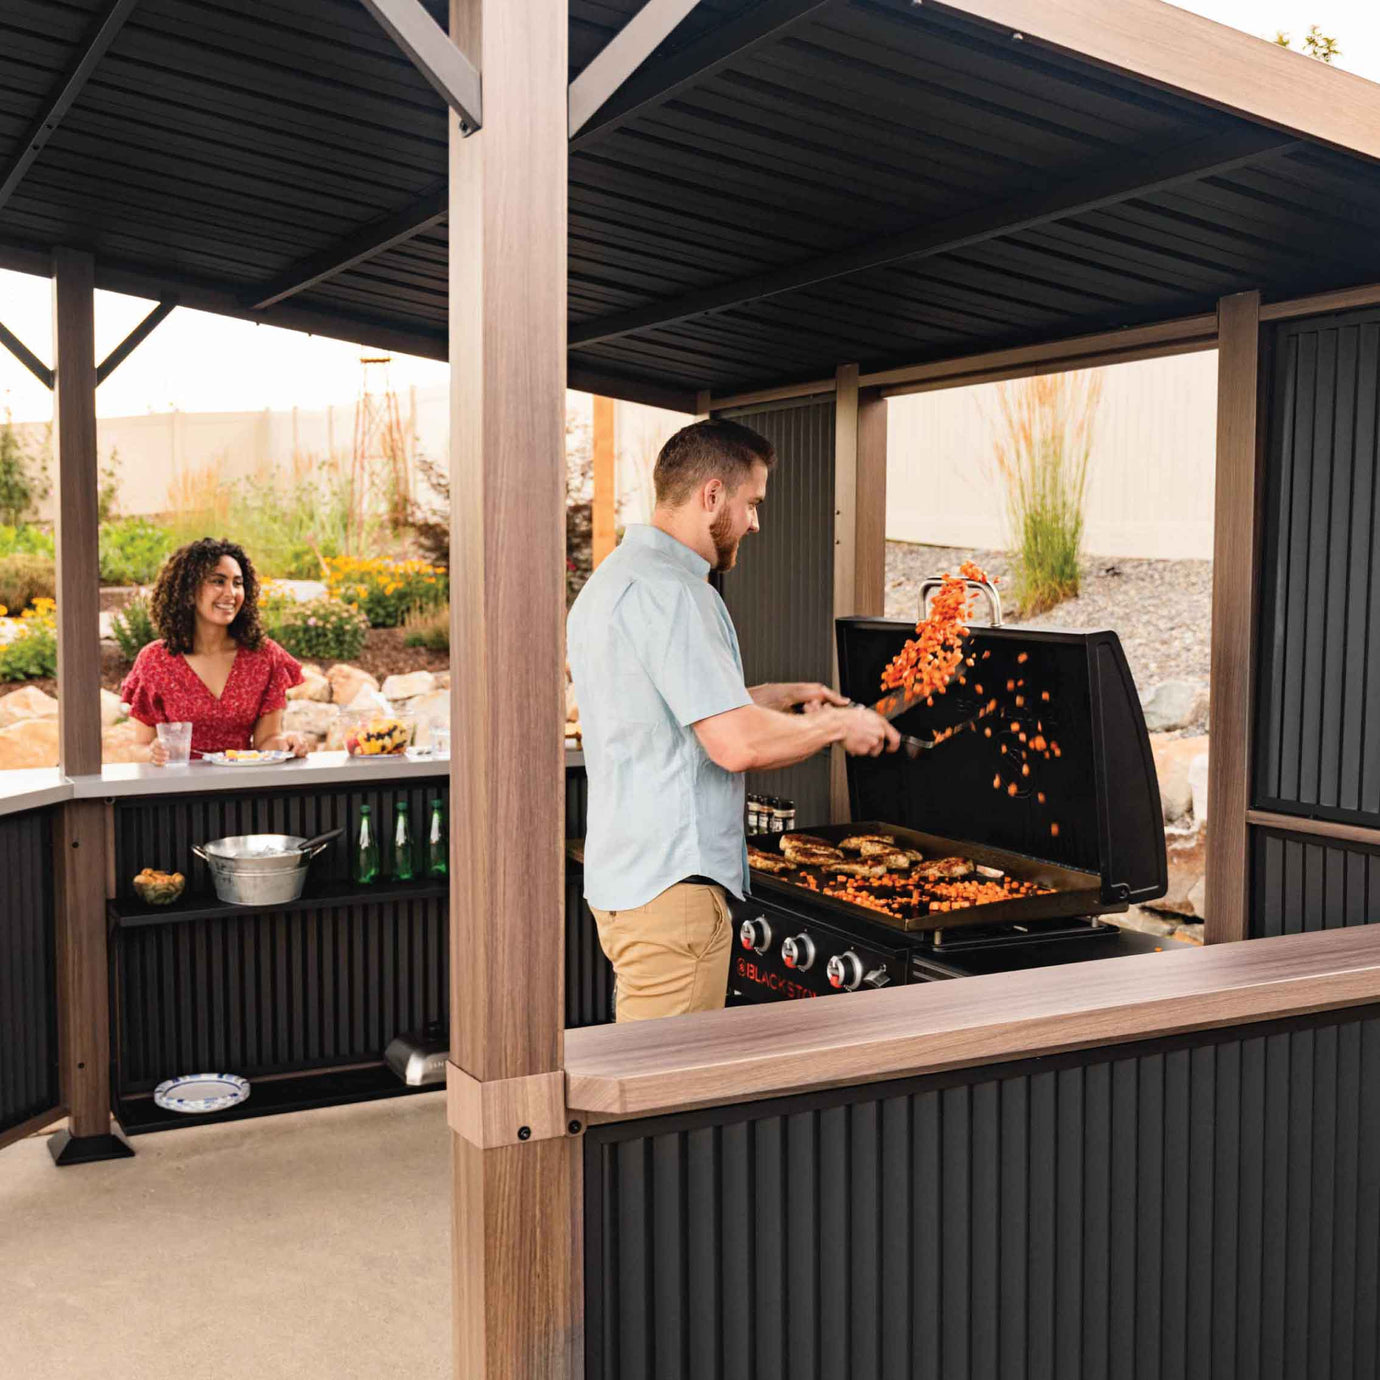 Grill Equipment to Elevate Your Outdoor Cooking